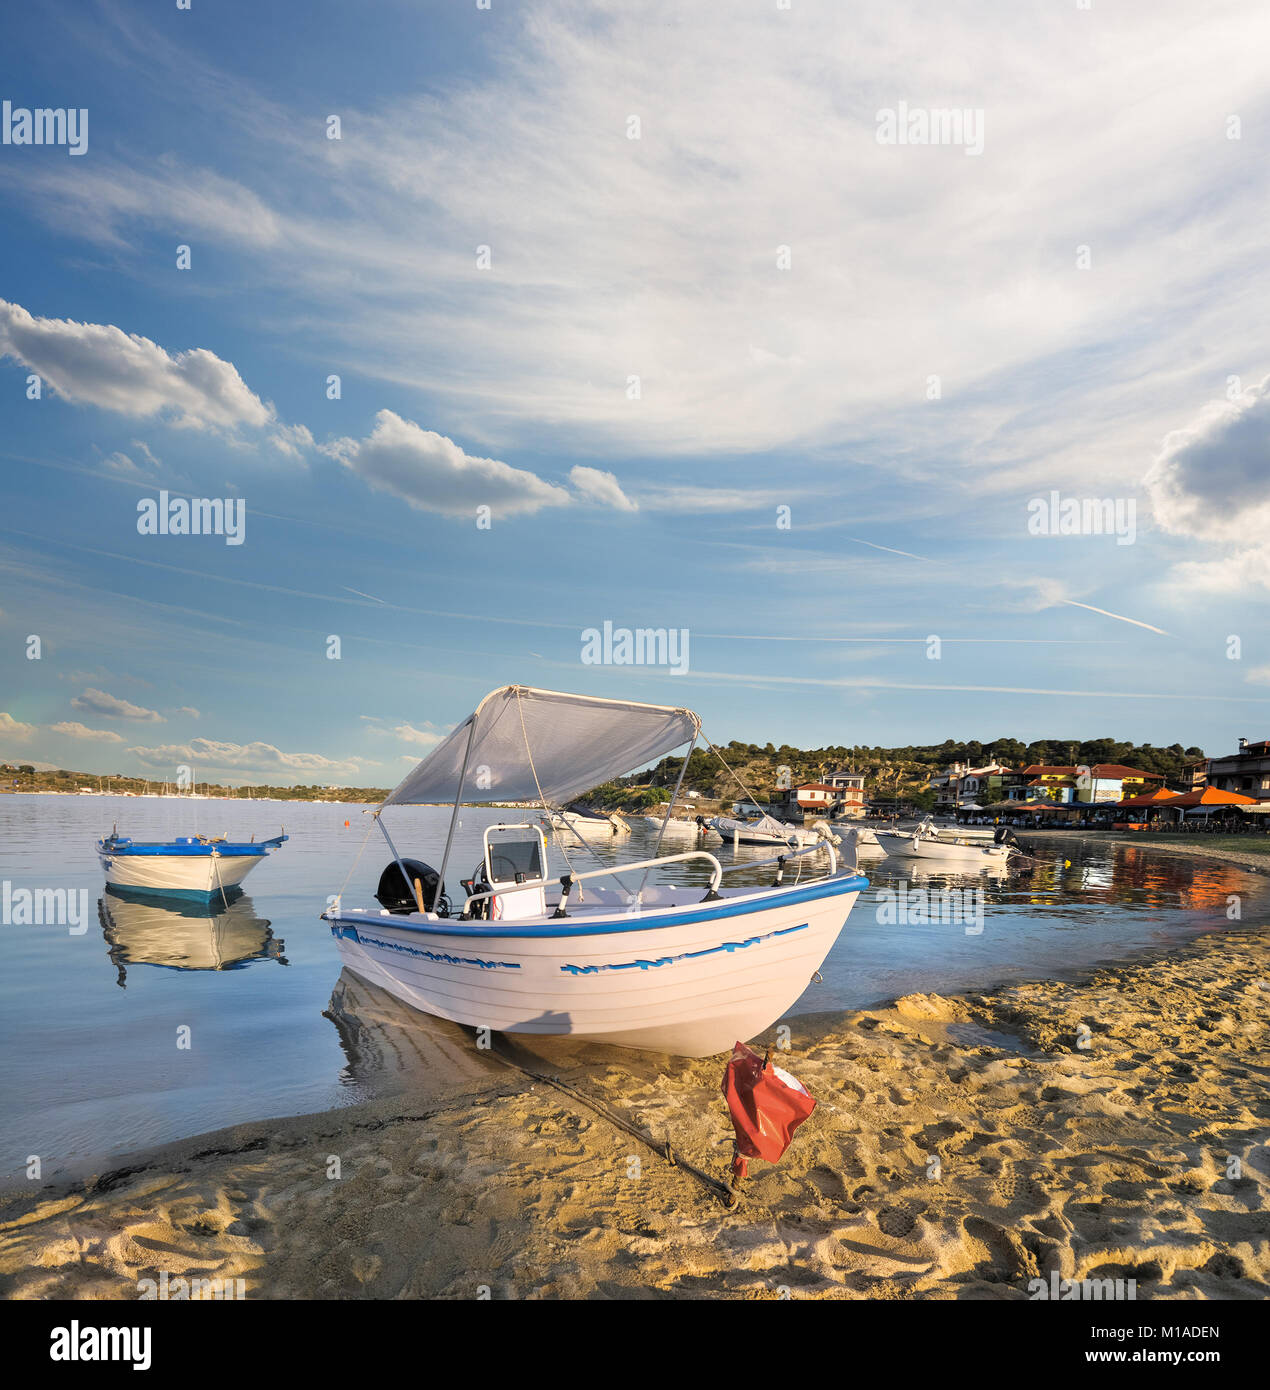 Touristic motor boat by the shore in Ormos Panagias, Sithonia, Northern Greece Stock Photo